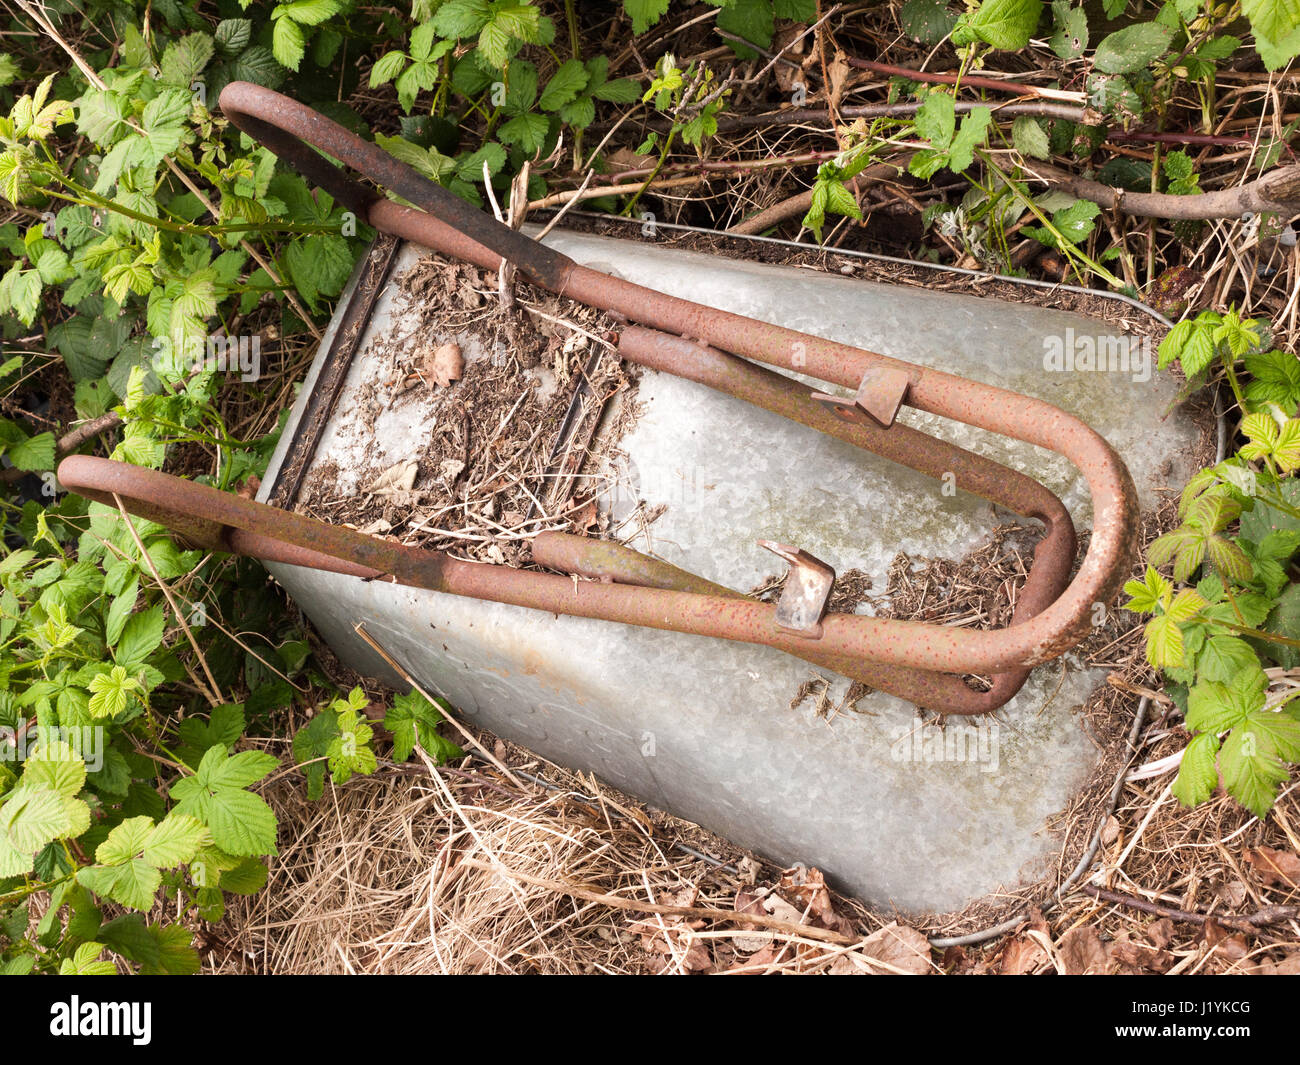 an upside down rusted and discarded thrown away wheel barrow made of metal and decaying on the ground ornament design gardening allotment planting gro Stock Photo